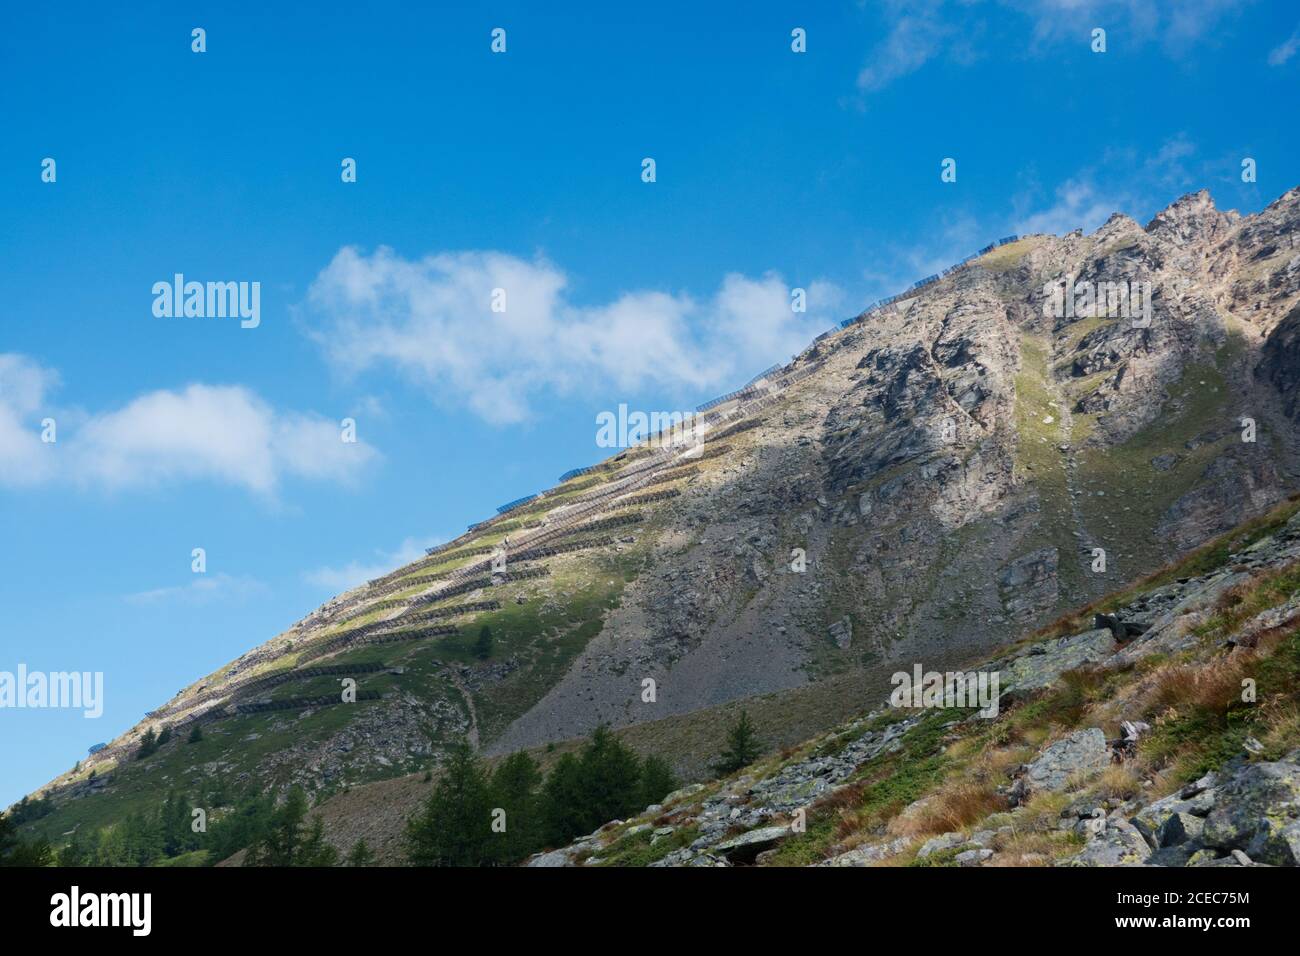 Avalanche barriers on the slope of mountains above the Simplon pass in Switzerland Stock Photo